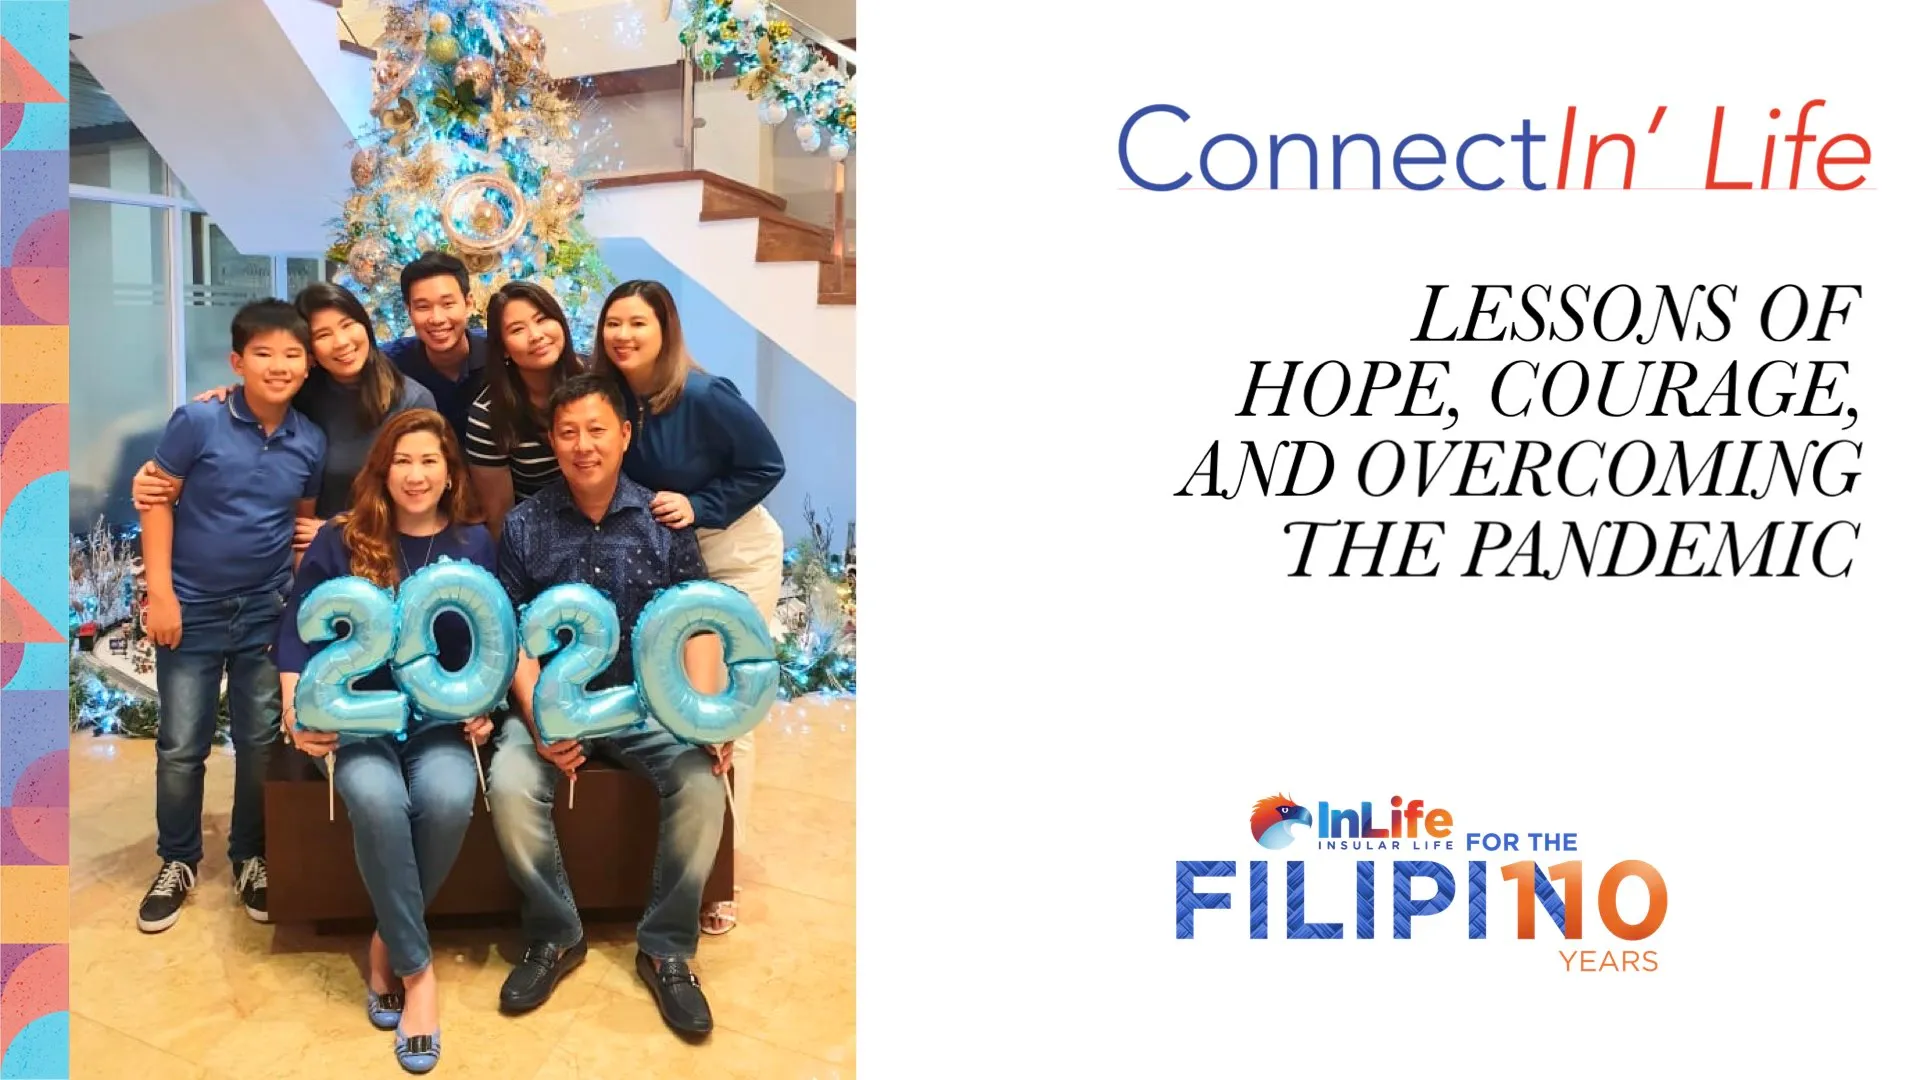 110-years-for-the-filipino-lessons-of-hope-courage-and-overcoming-the-pandemic